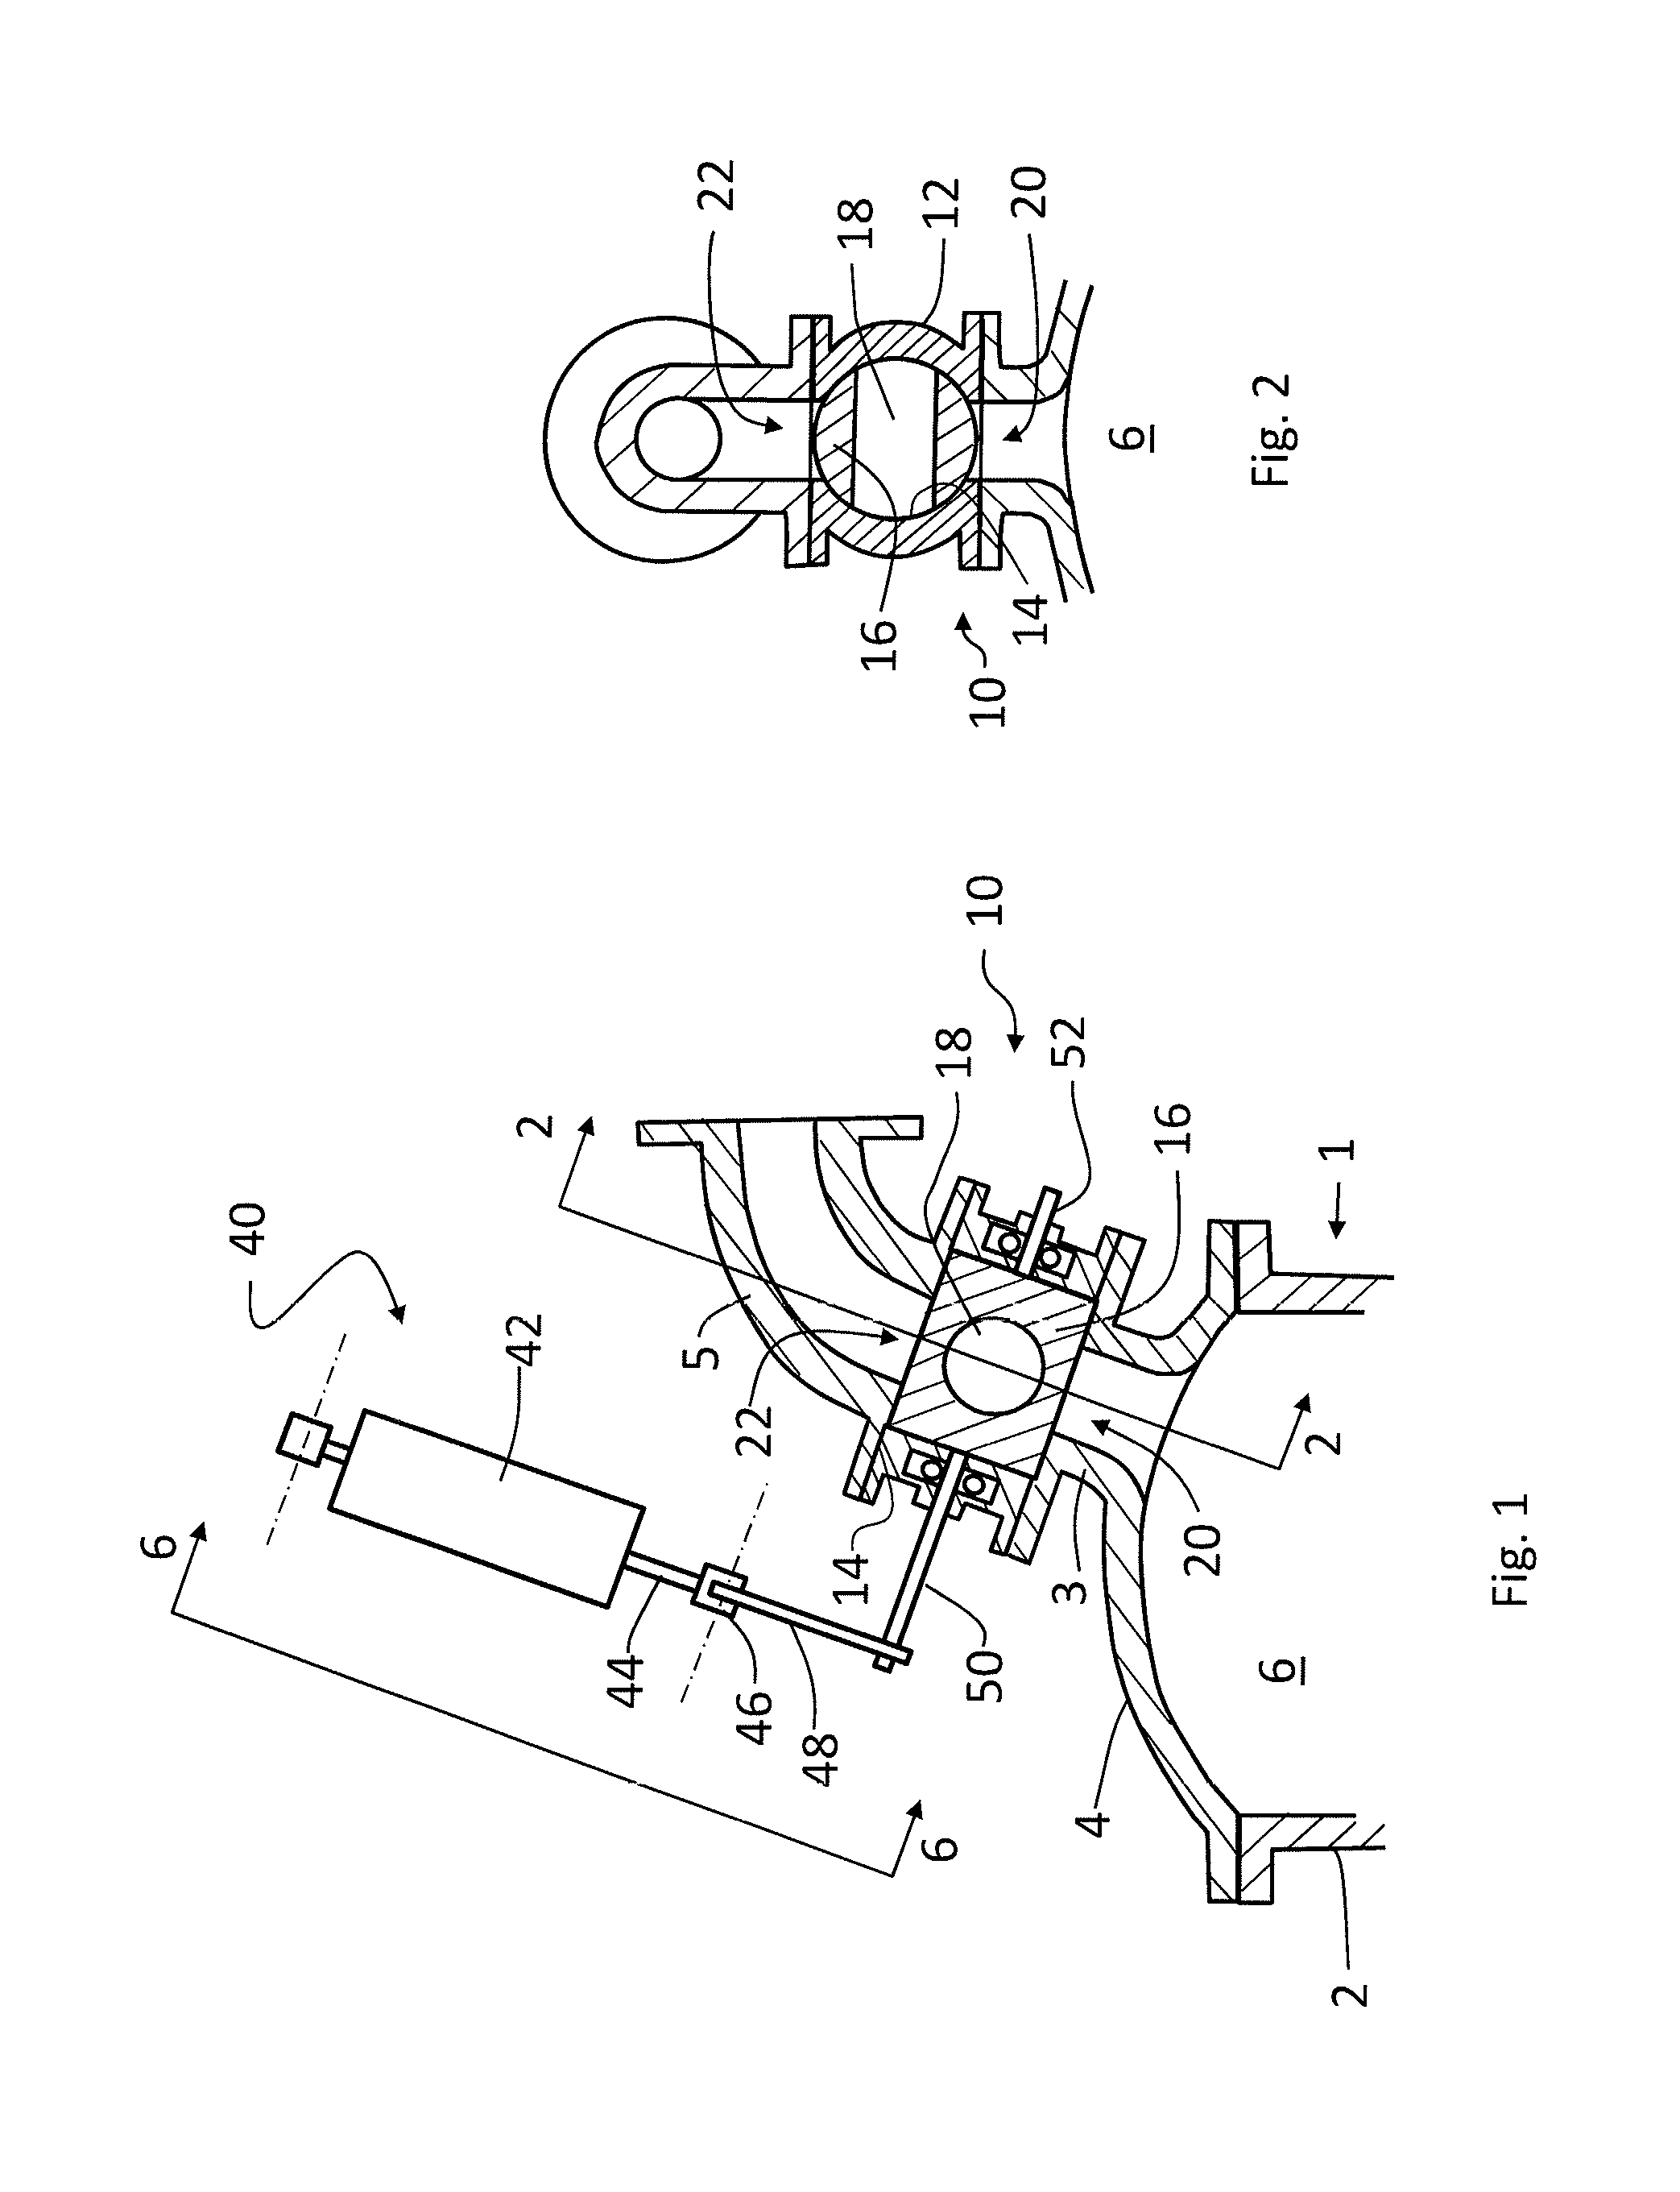 Solenoid-controlled rotary intake and exhaust valves for internal combustion engines